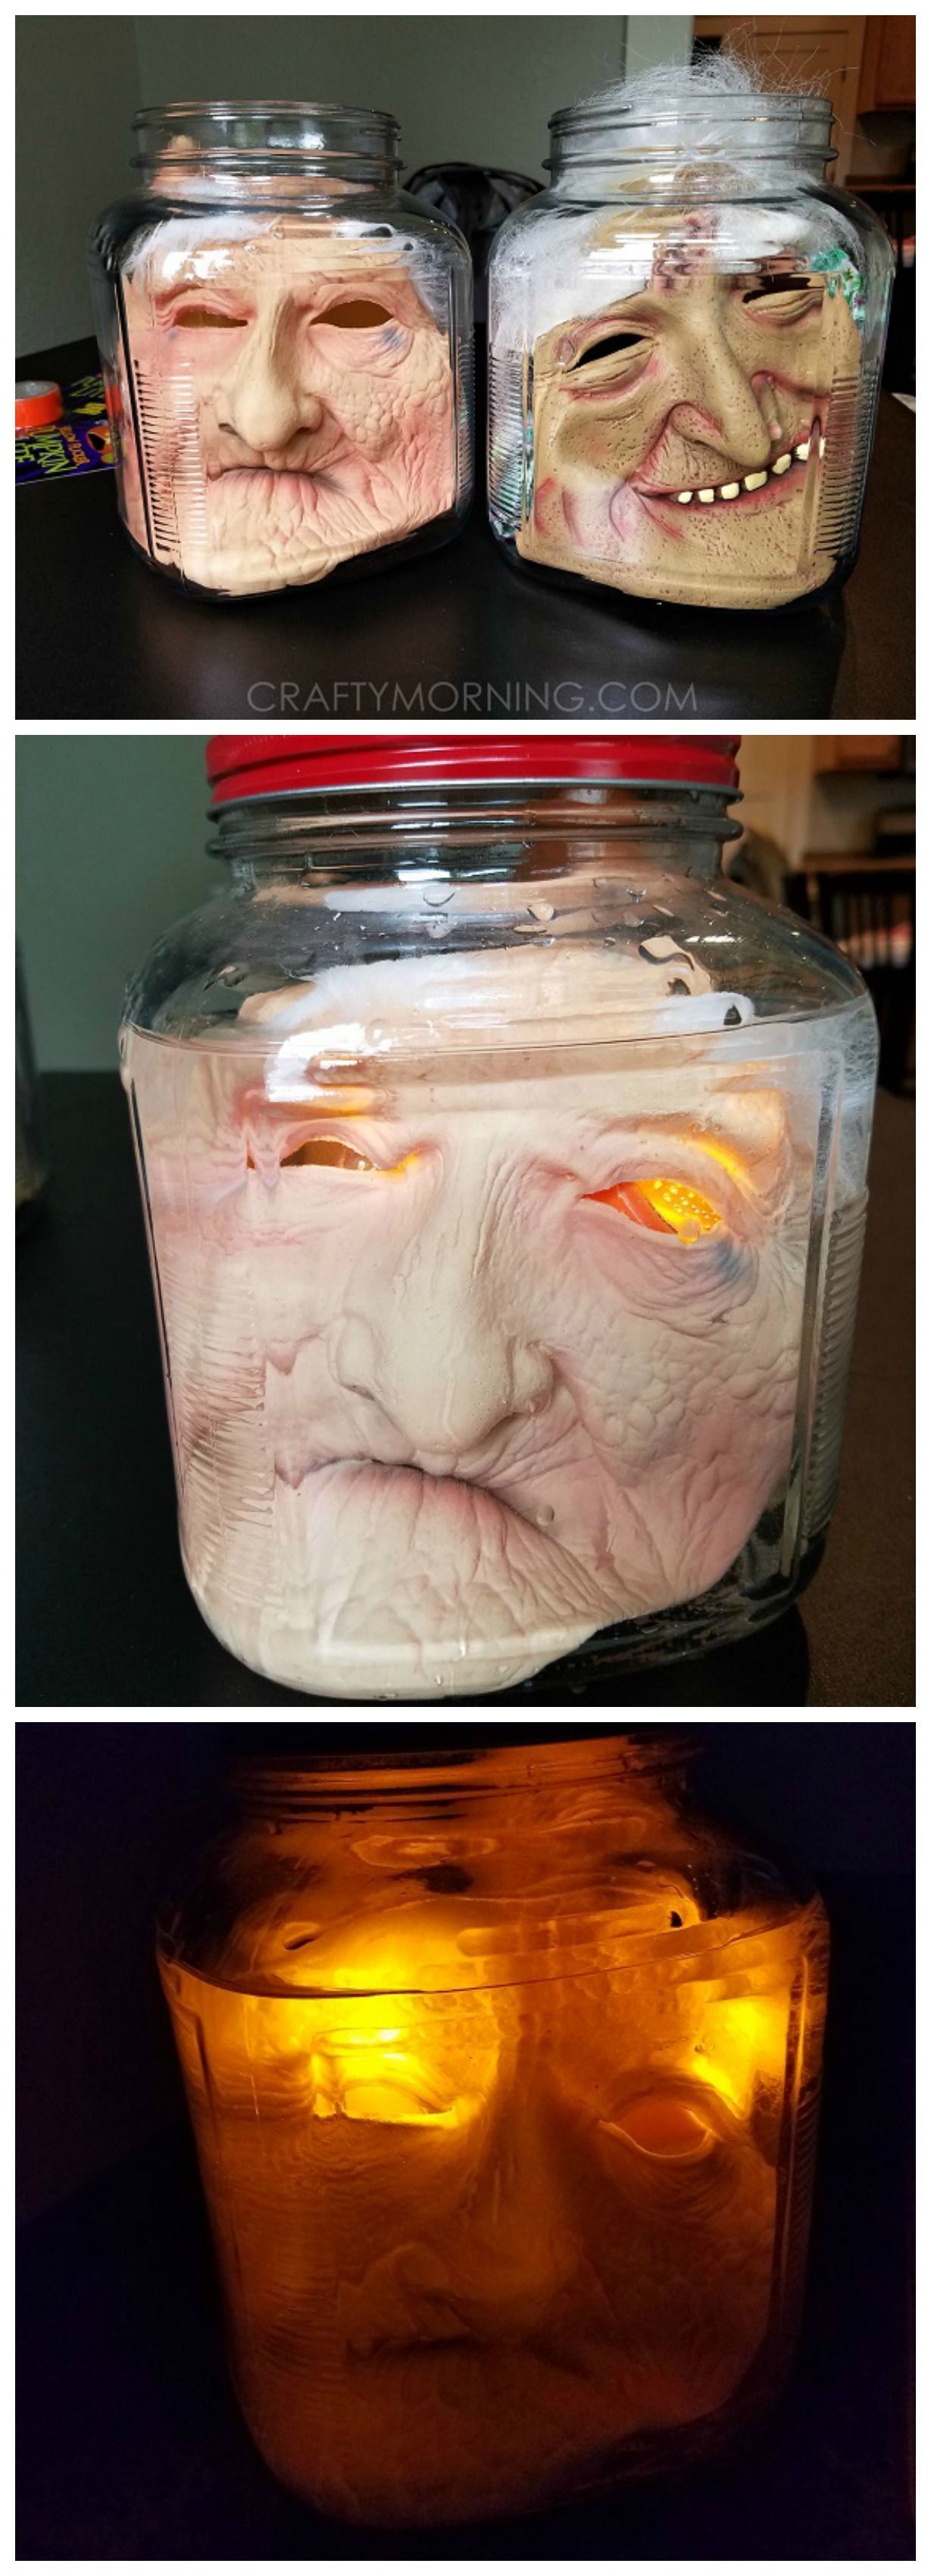 How to make creepy heads in jars using masks! Such a fun halloween decoration to make for kids!